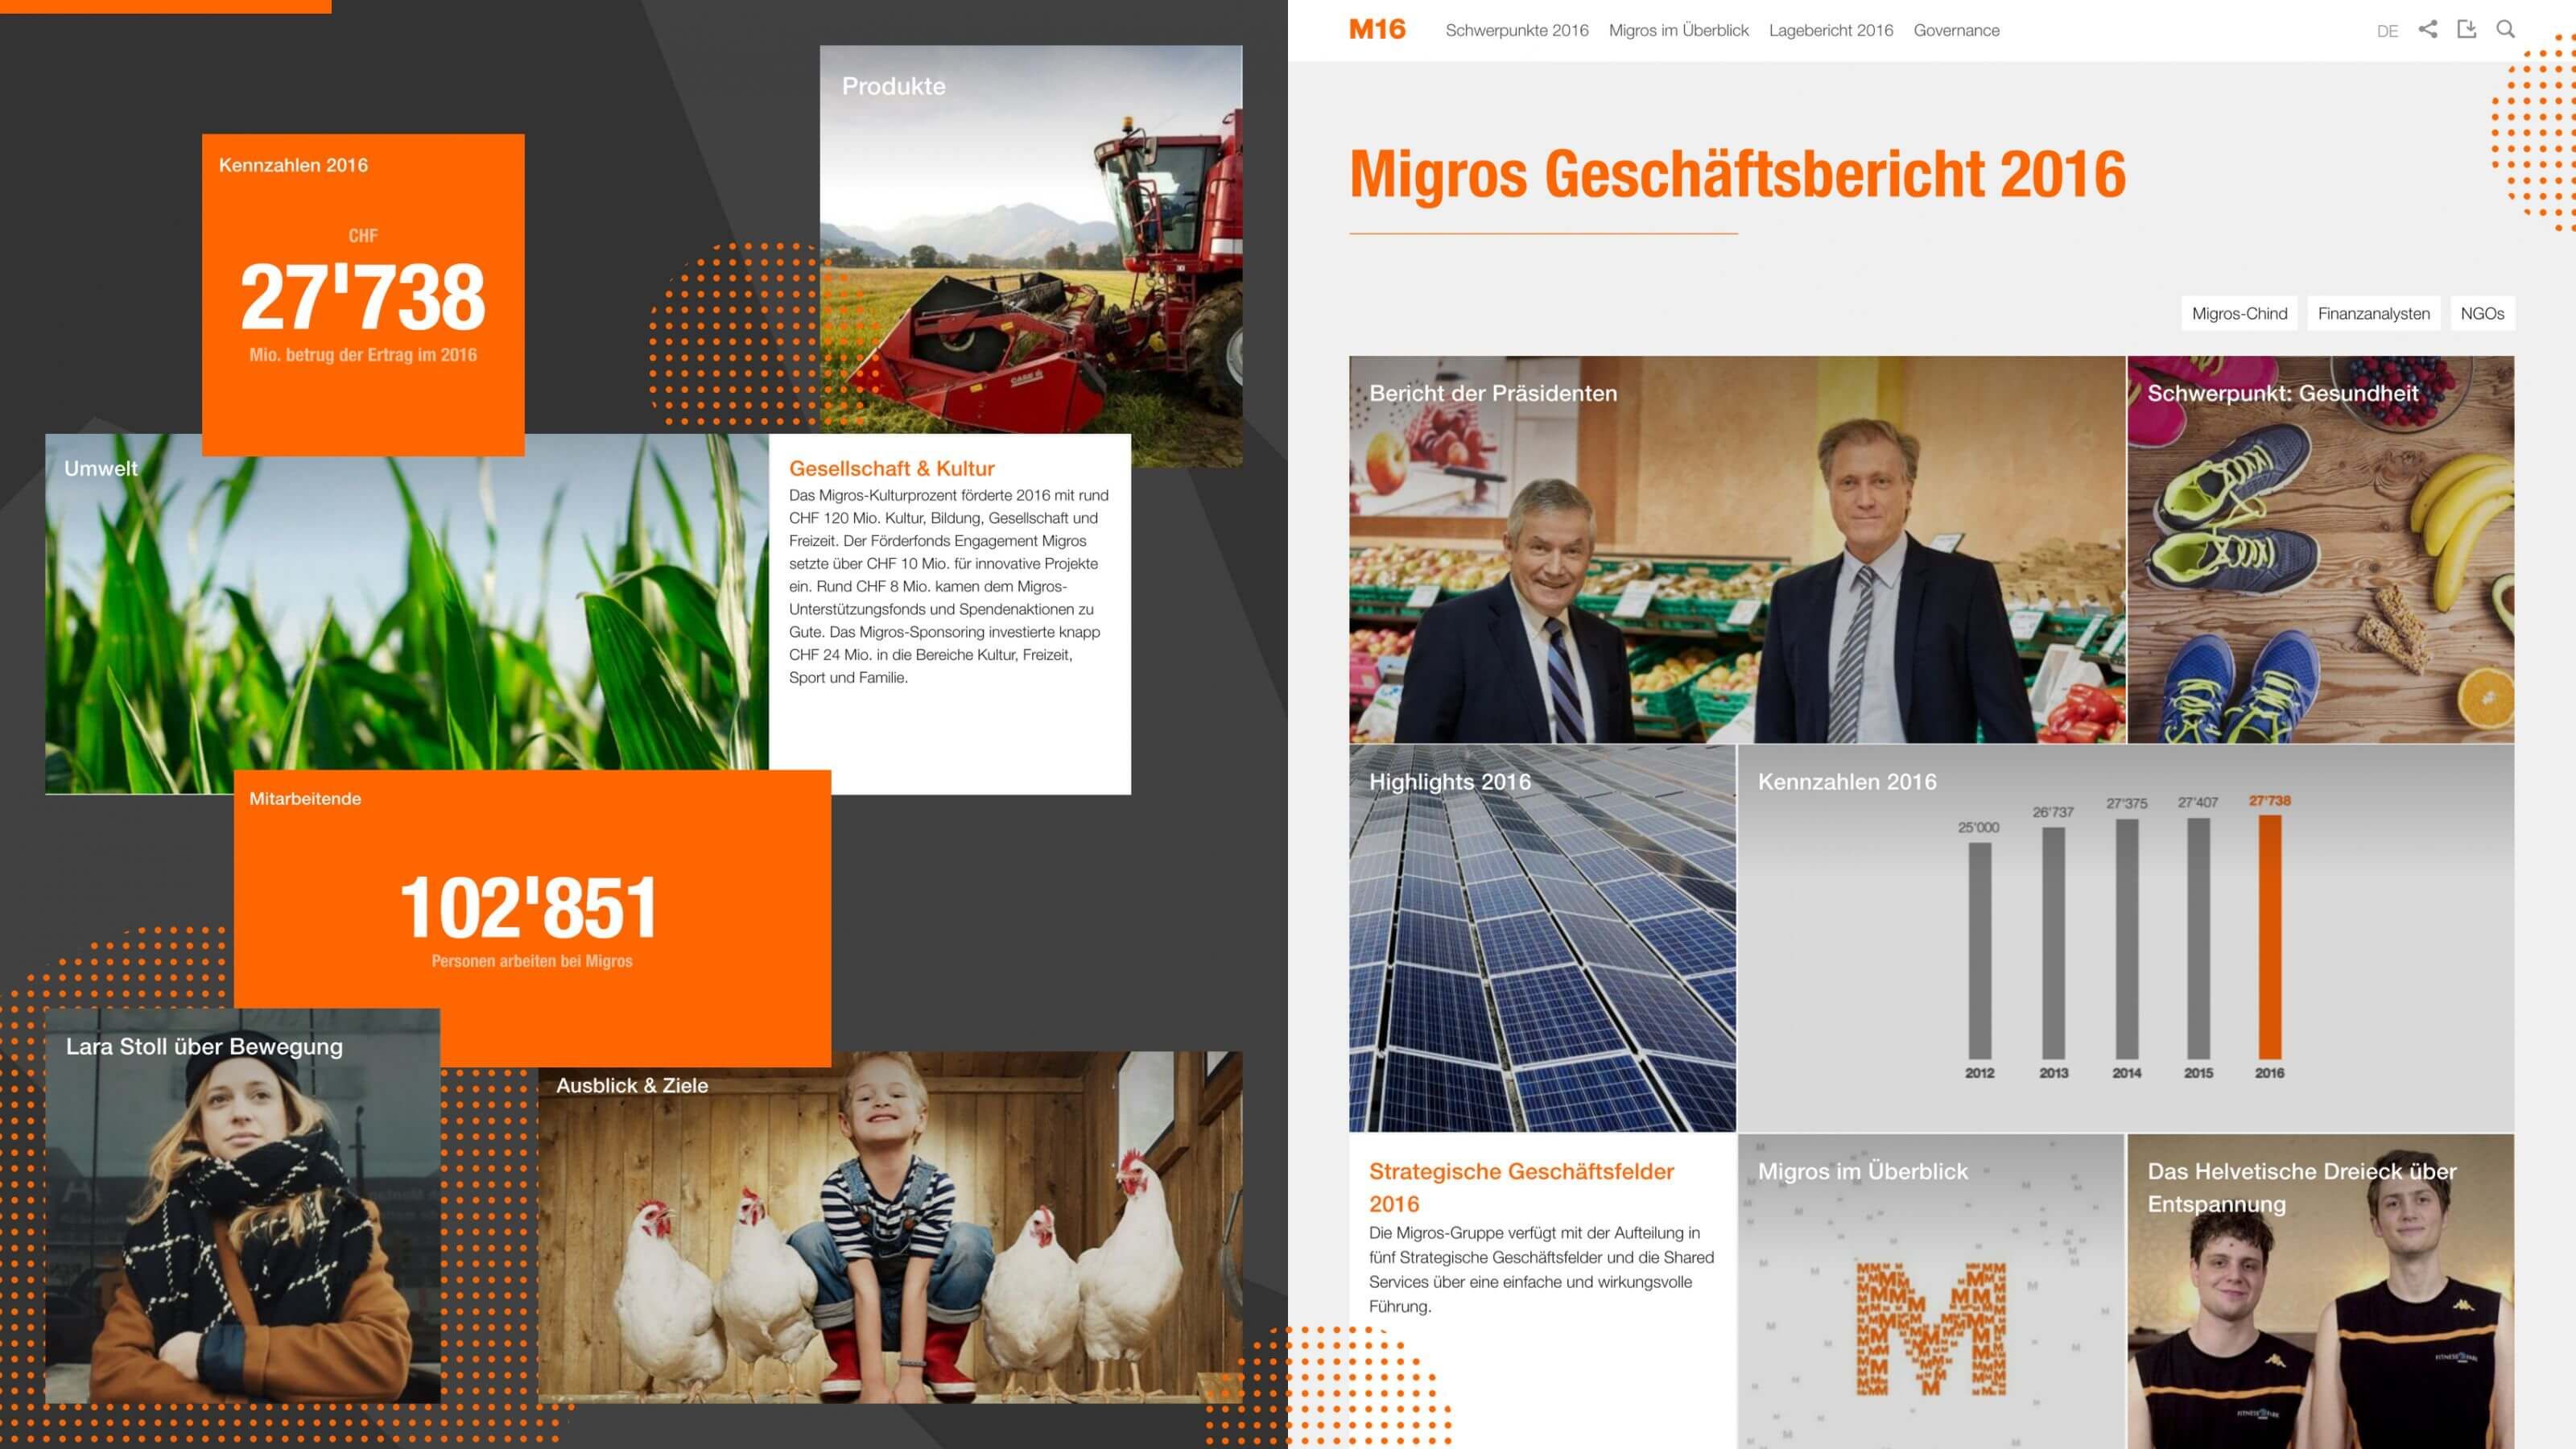 Insights into the Migros Annual Report M16, for which merkle provided support